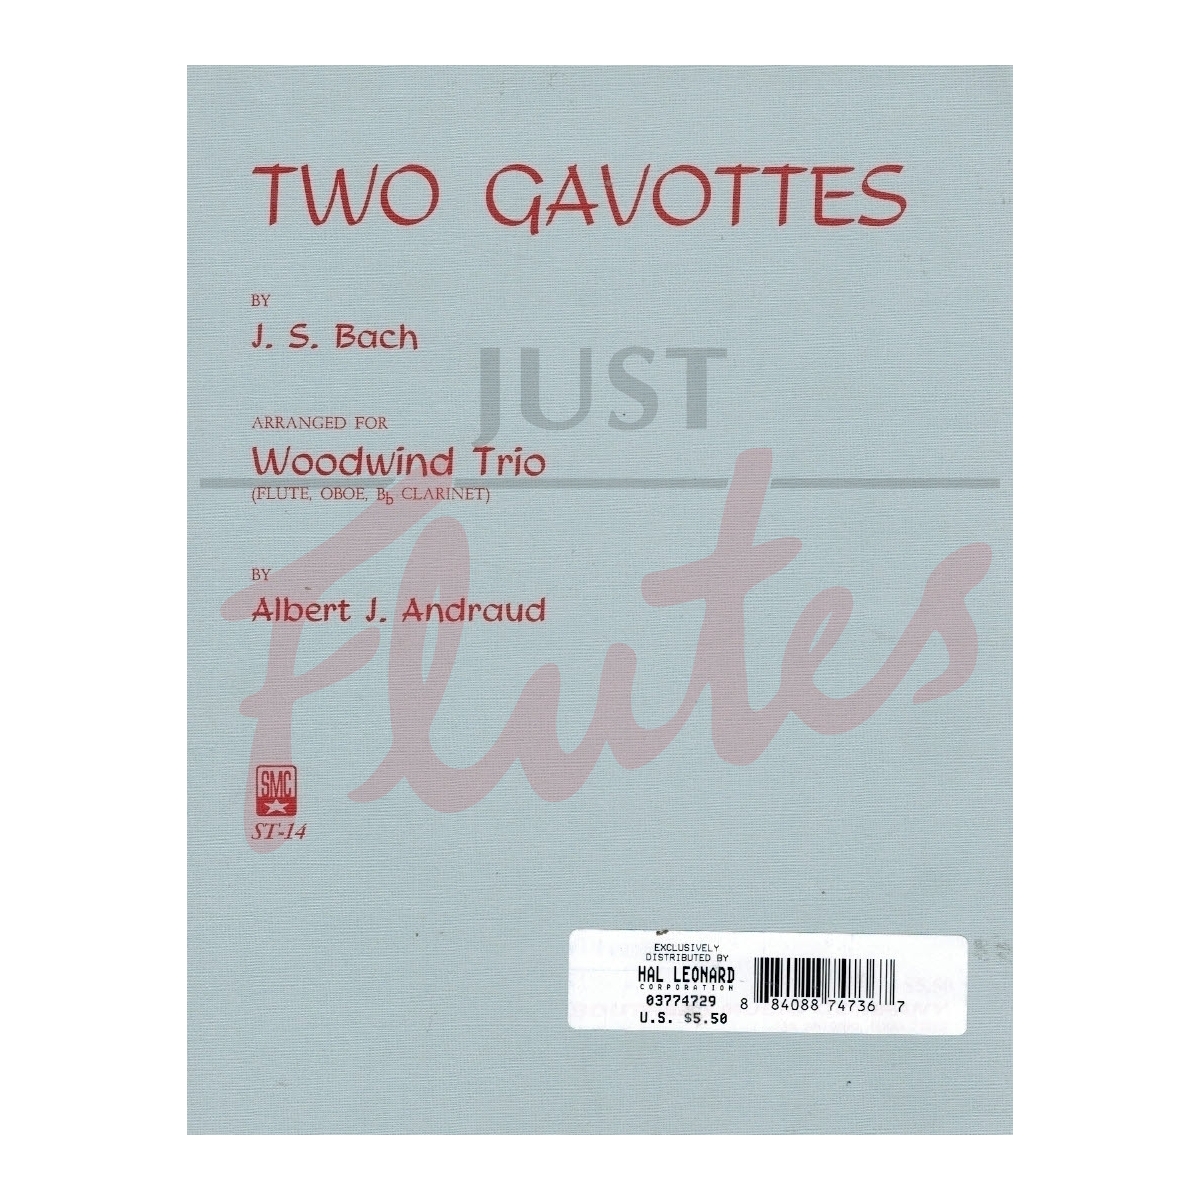 Two Gavottes for Wind Trio